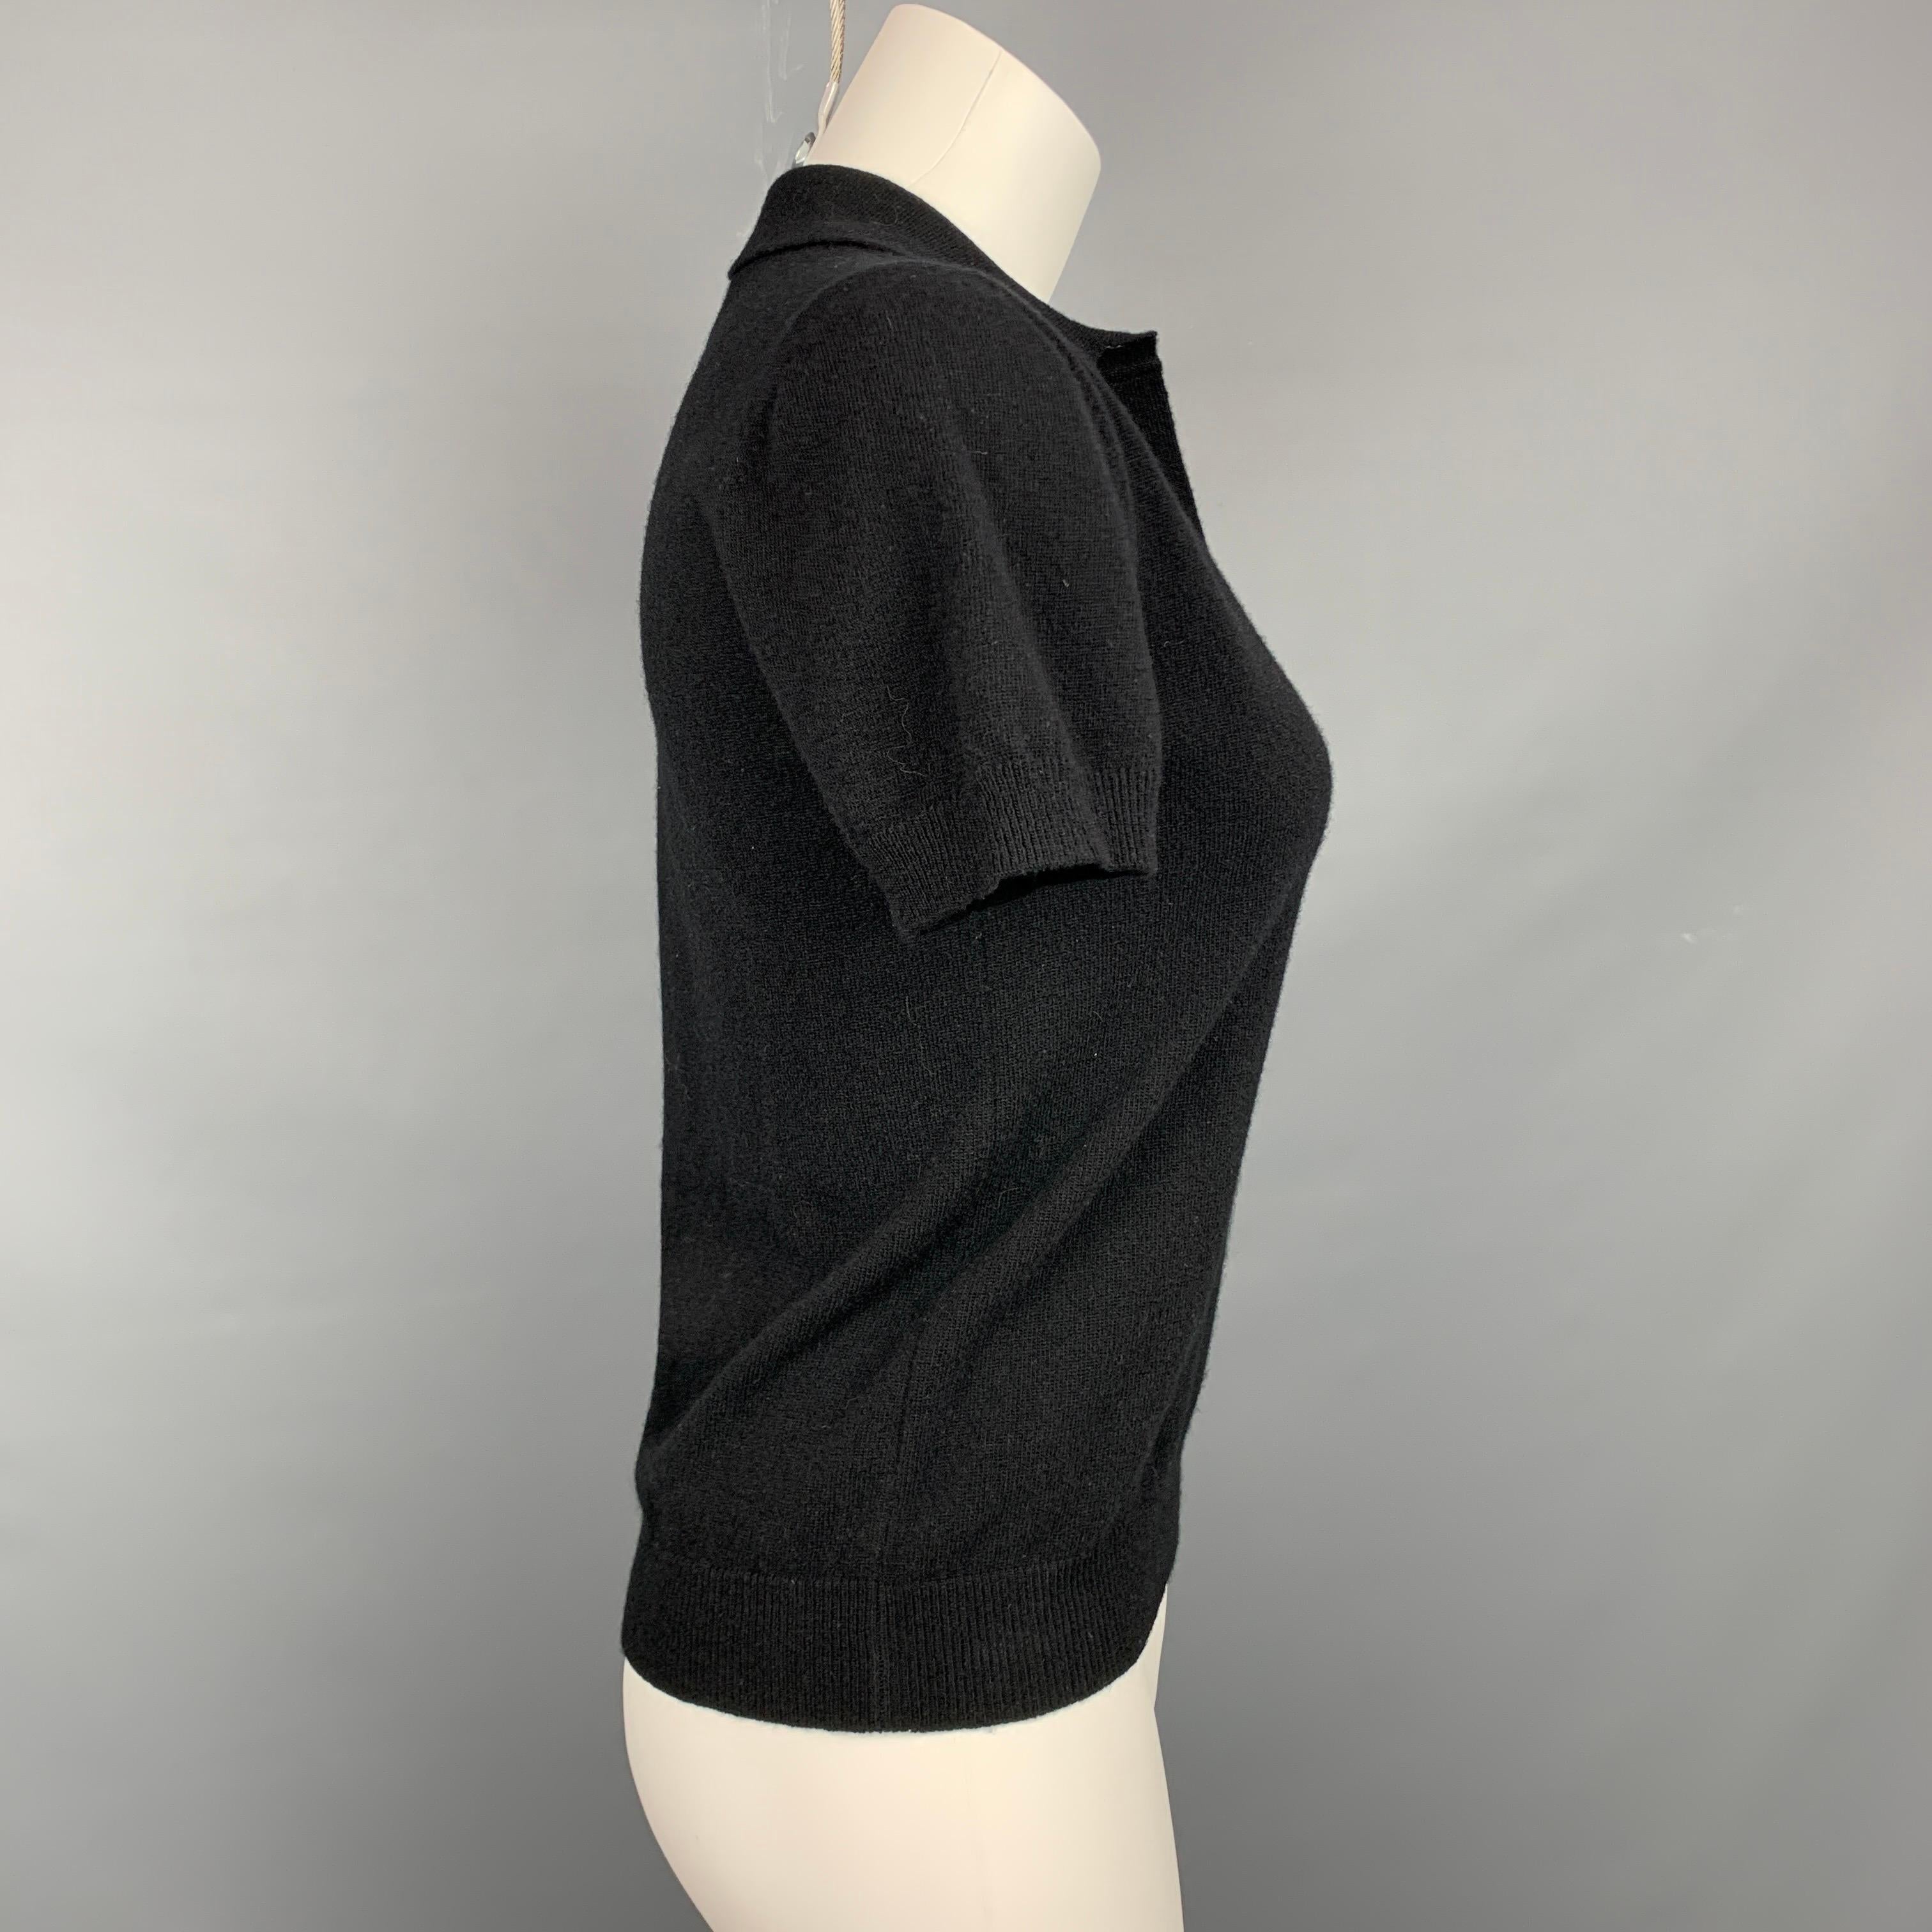 ROCHAS polo shirt comes in a black wool with a 